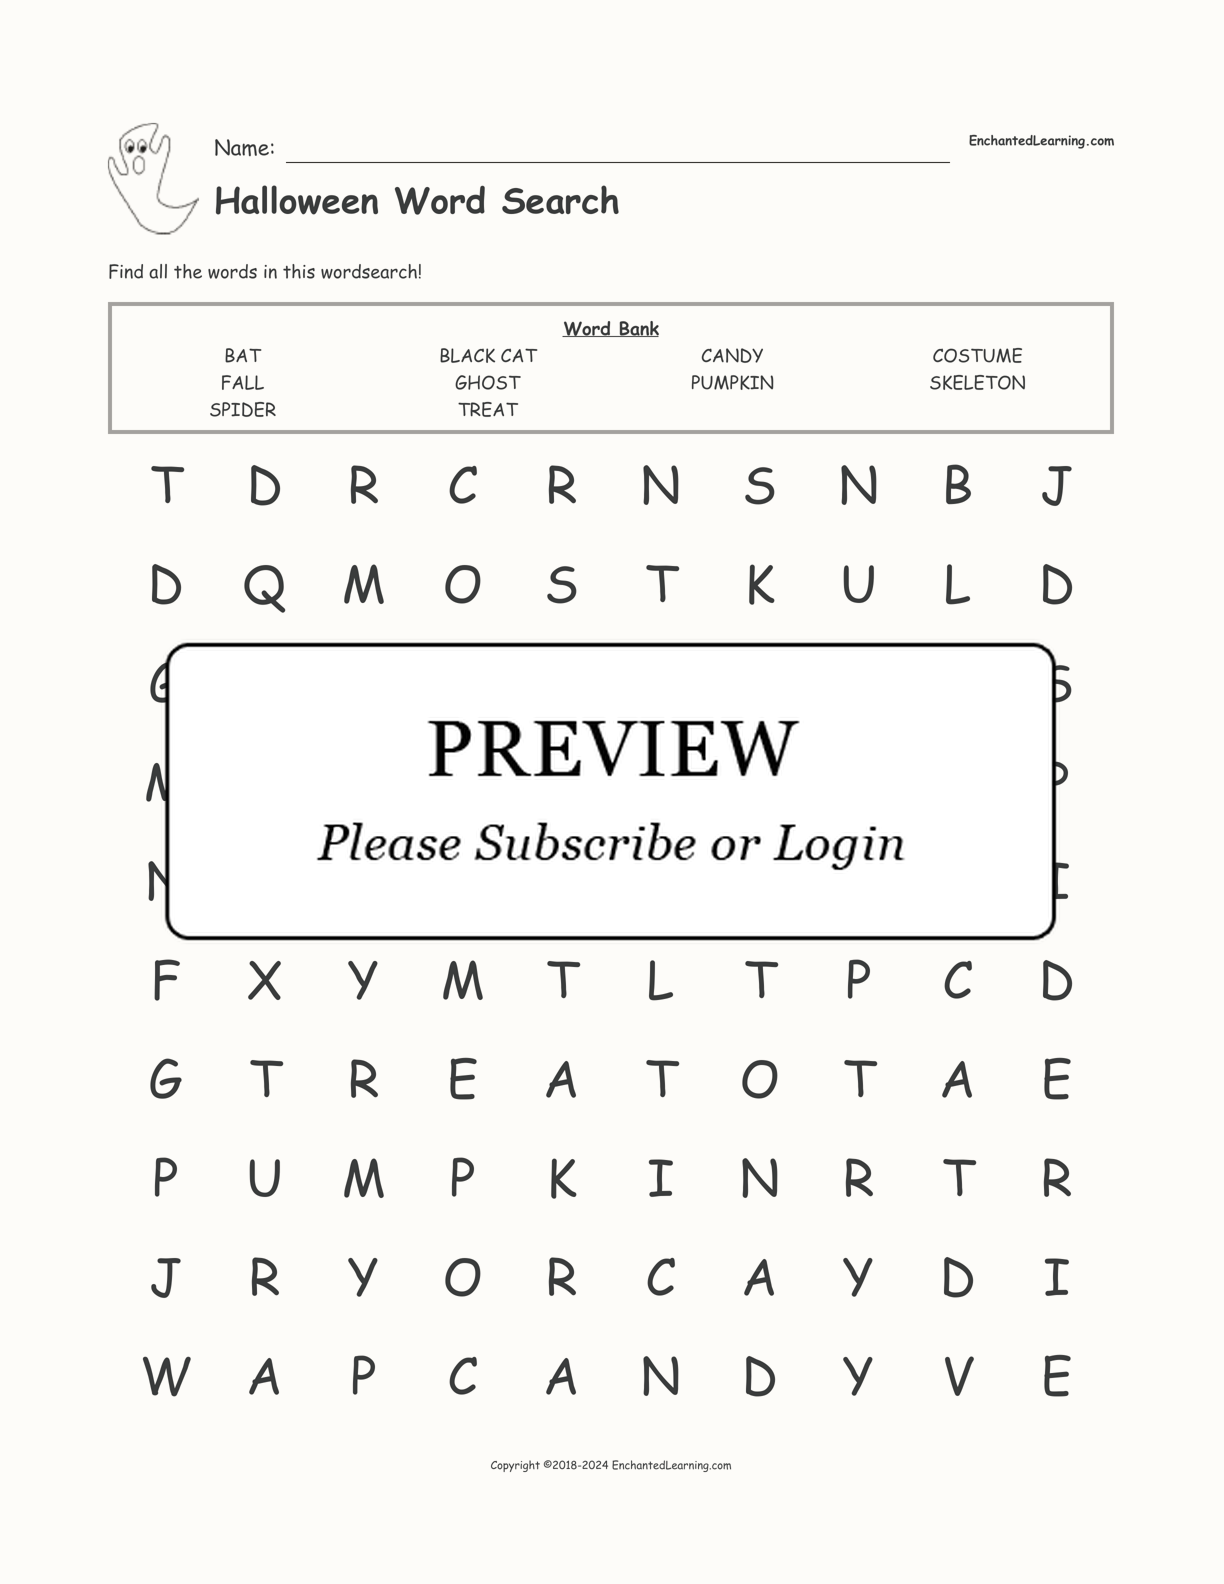 Halloween Word Search interactive worksheet page 1